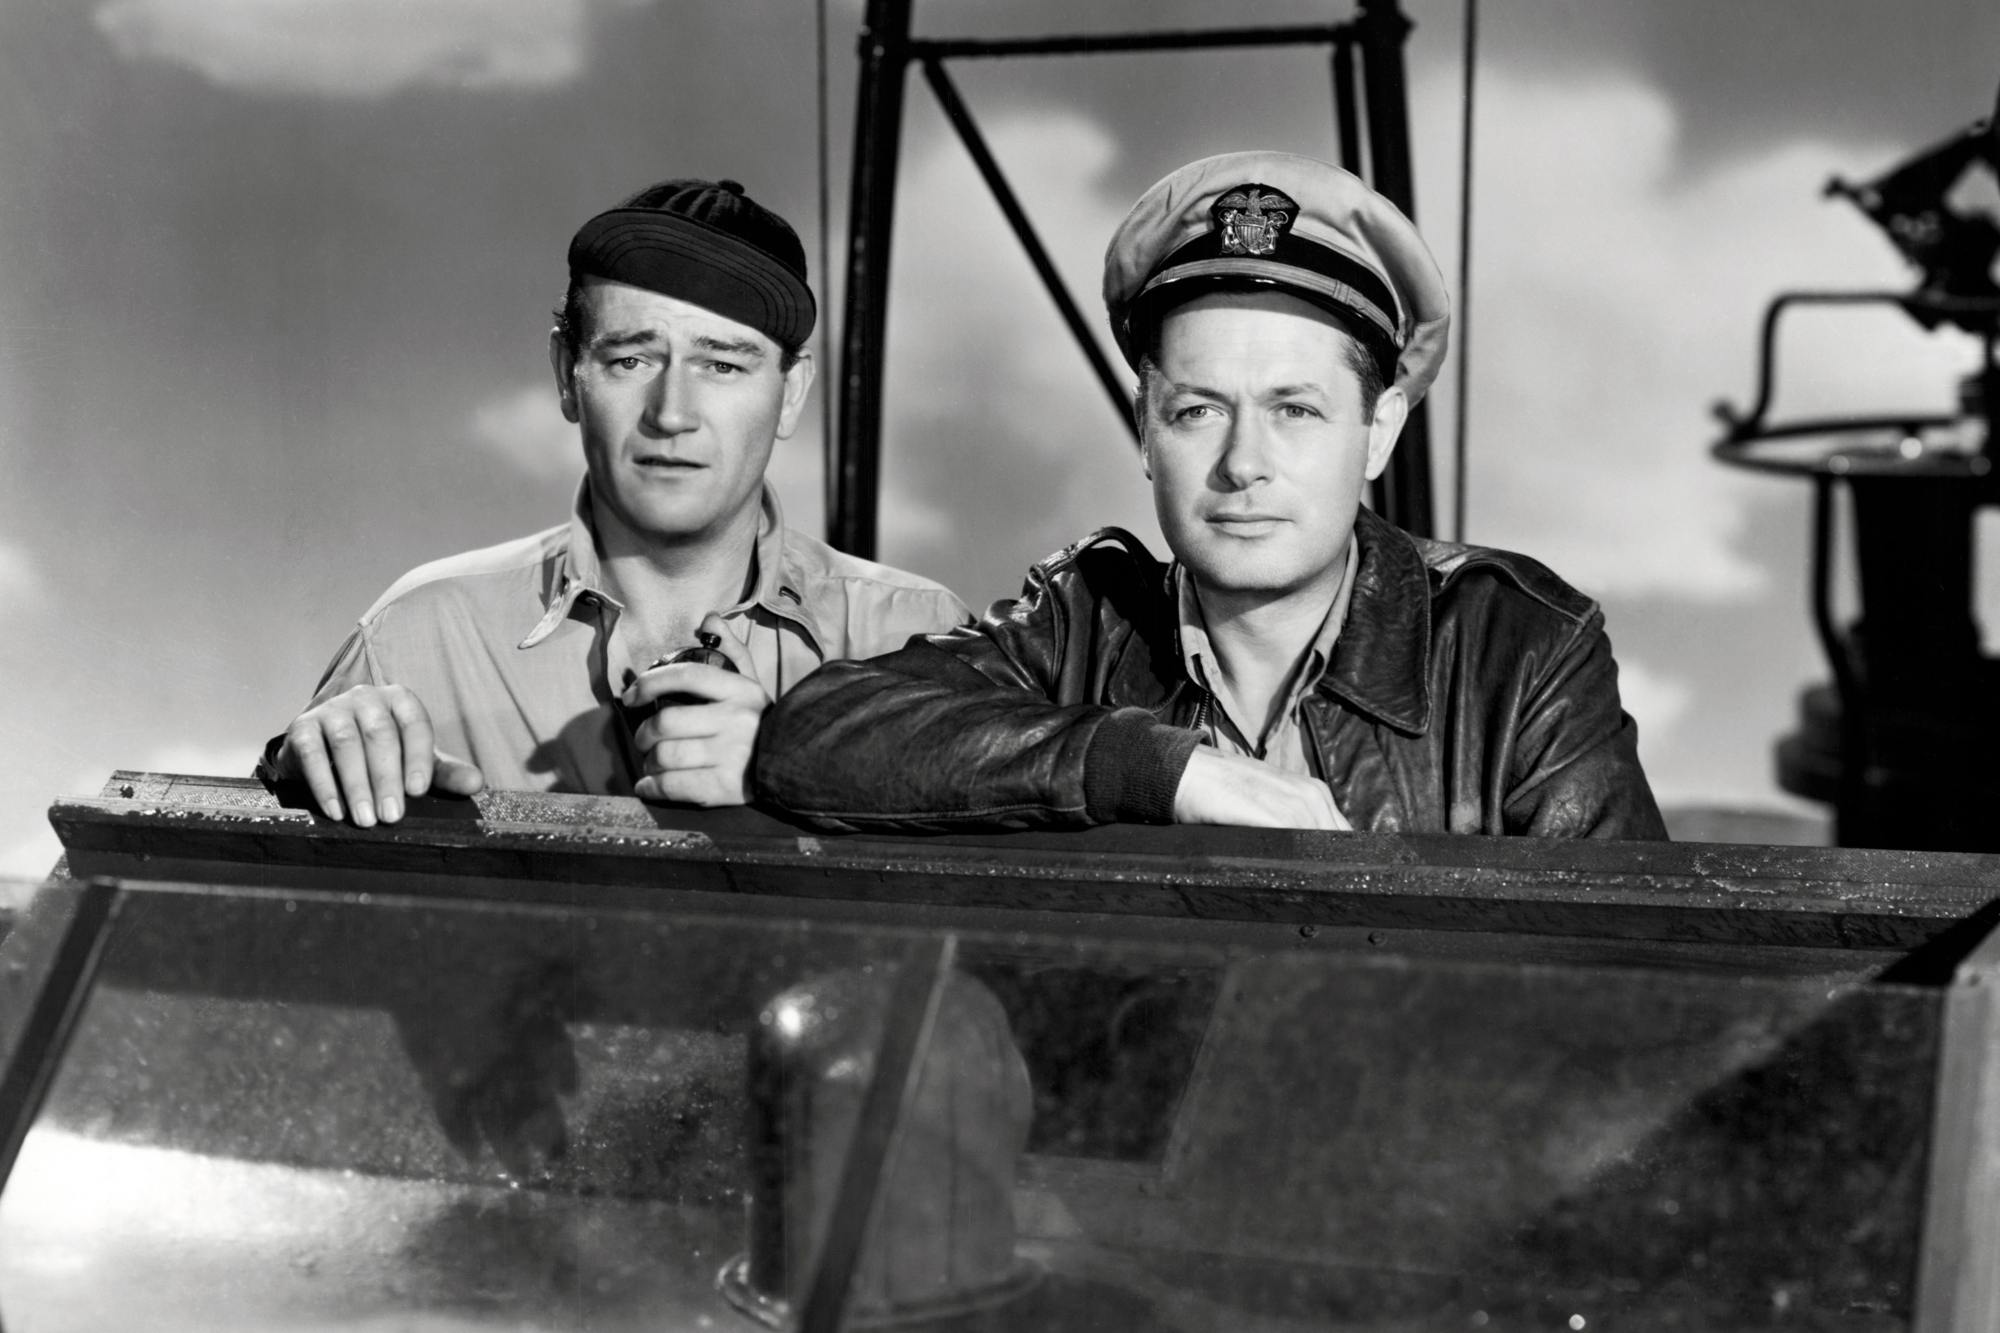 'They Were Expendable' John Wayne as Lt. Rusty Ryan and Robert Montgomery as Lt. John Brickley on a ship looking onward